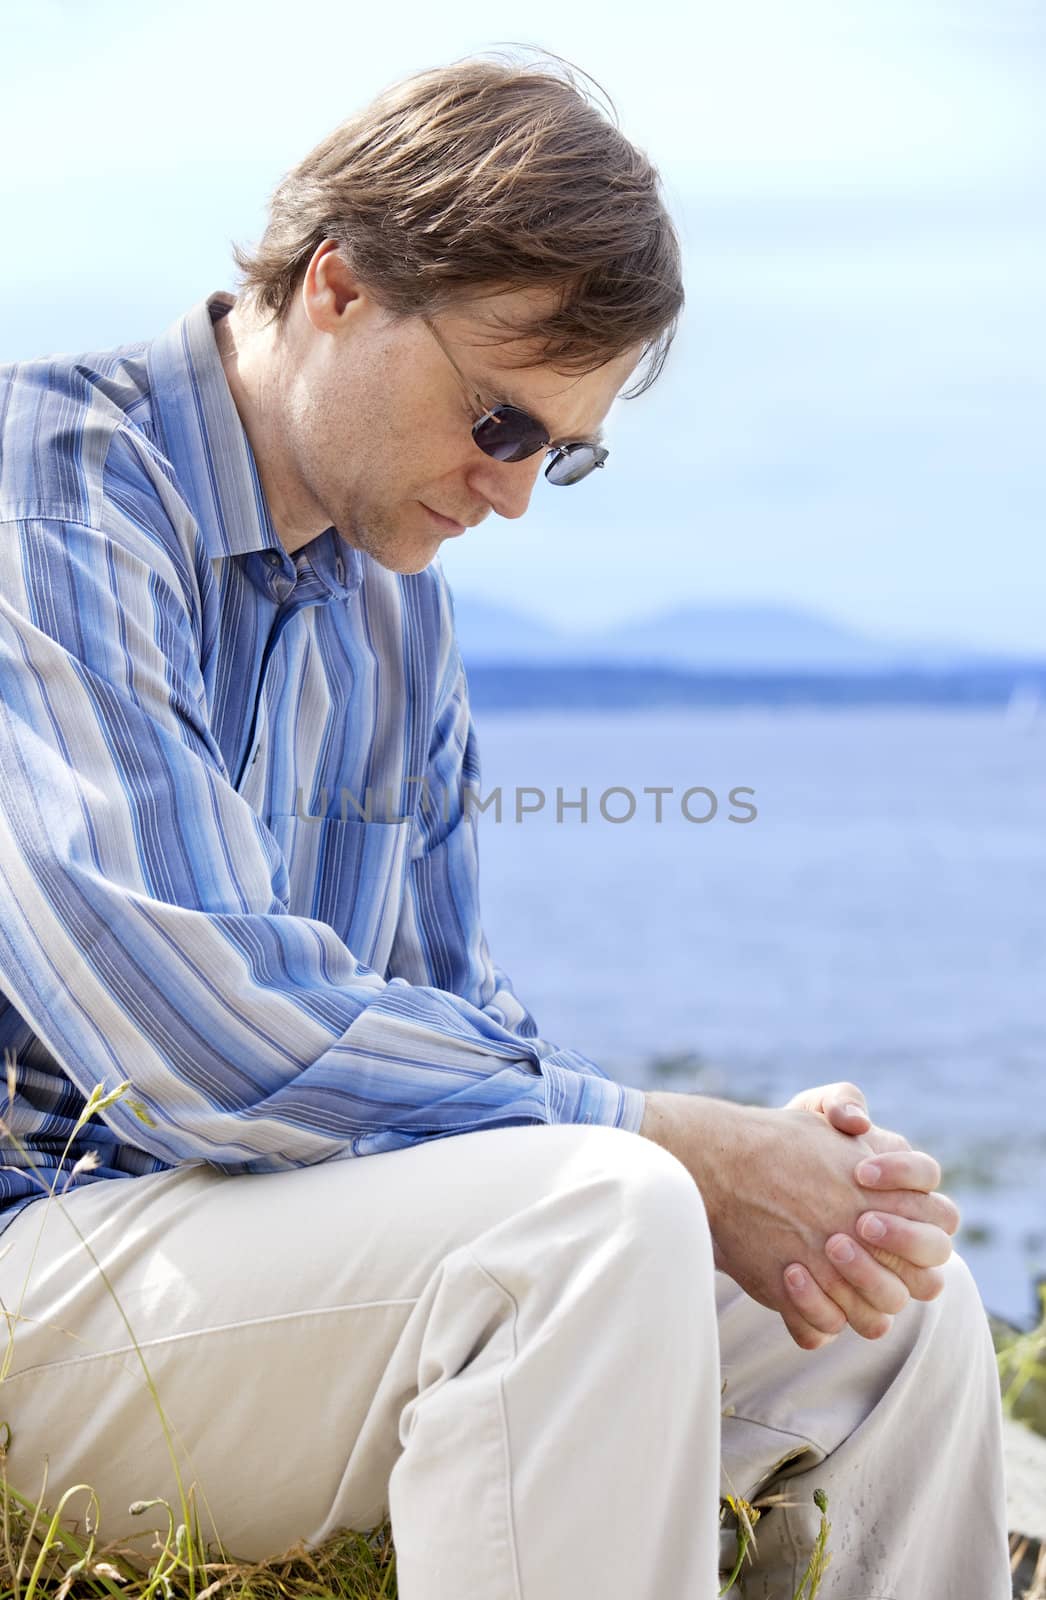 Handsome Caucasian man in forties praying outdoors by side of lake